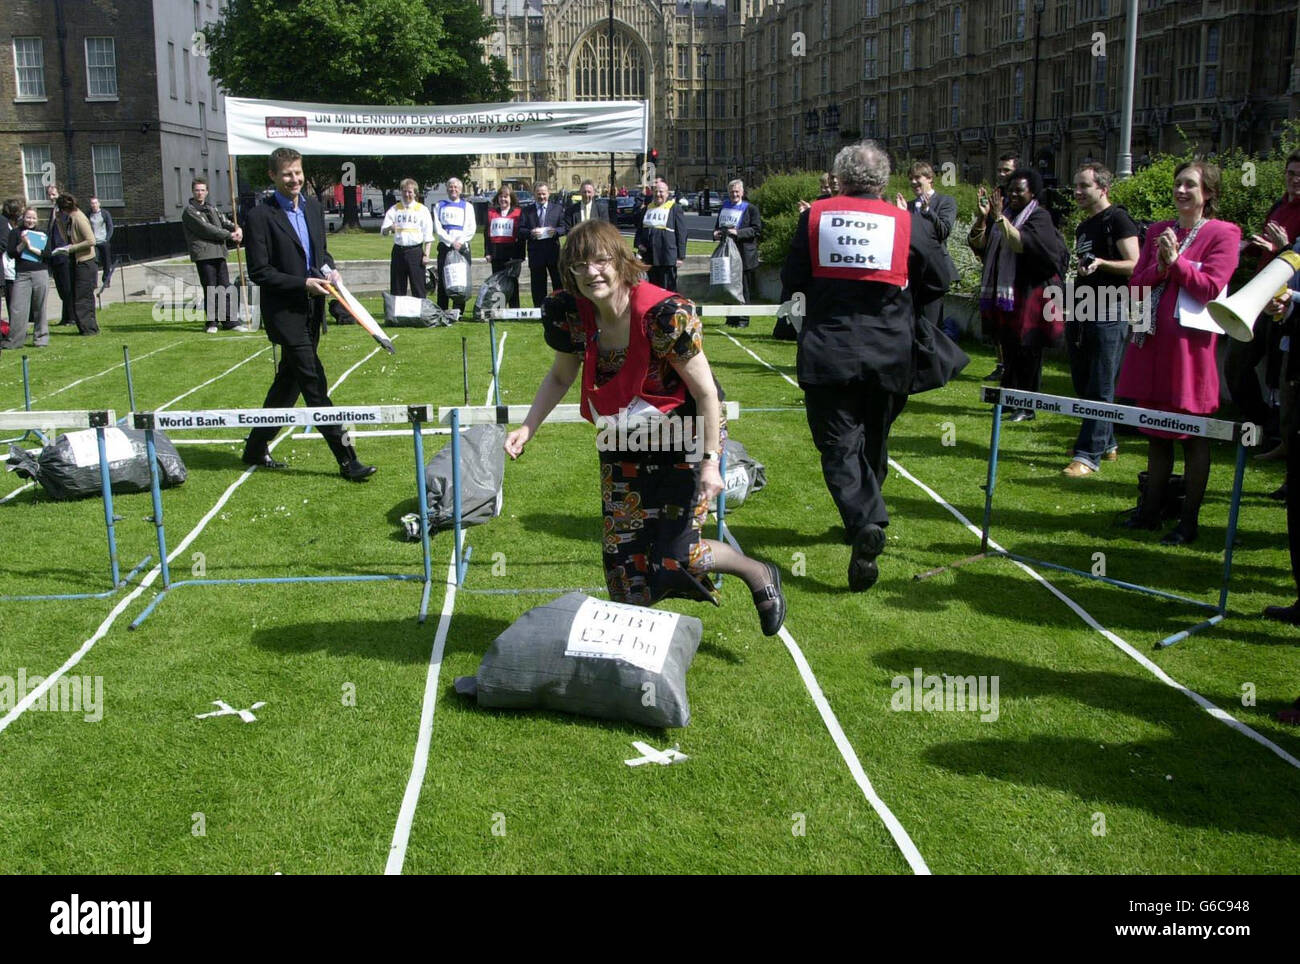 Val Davey, Labour MP for Bristol West represents Tanzania in a race against third world debt on College Green in central London. MP's from all three major parties were joined by six time gold medallist Steve Cram to call on world leaders to drop the third world debt. Stock Photo